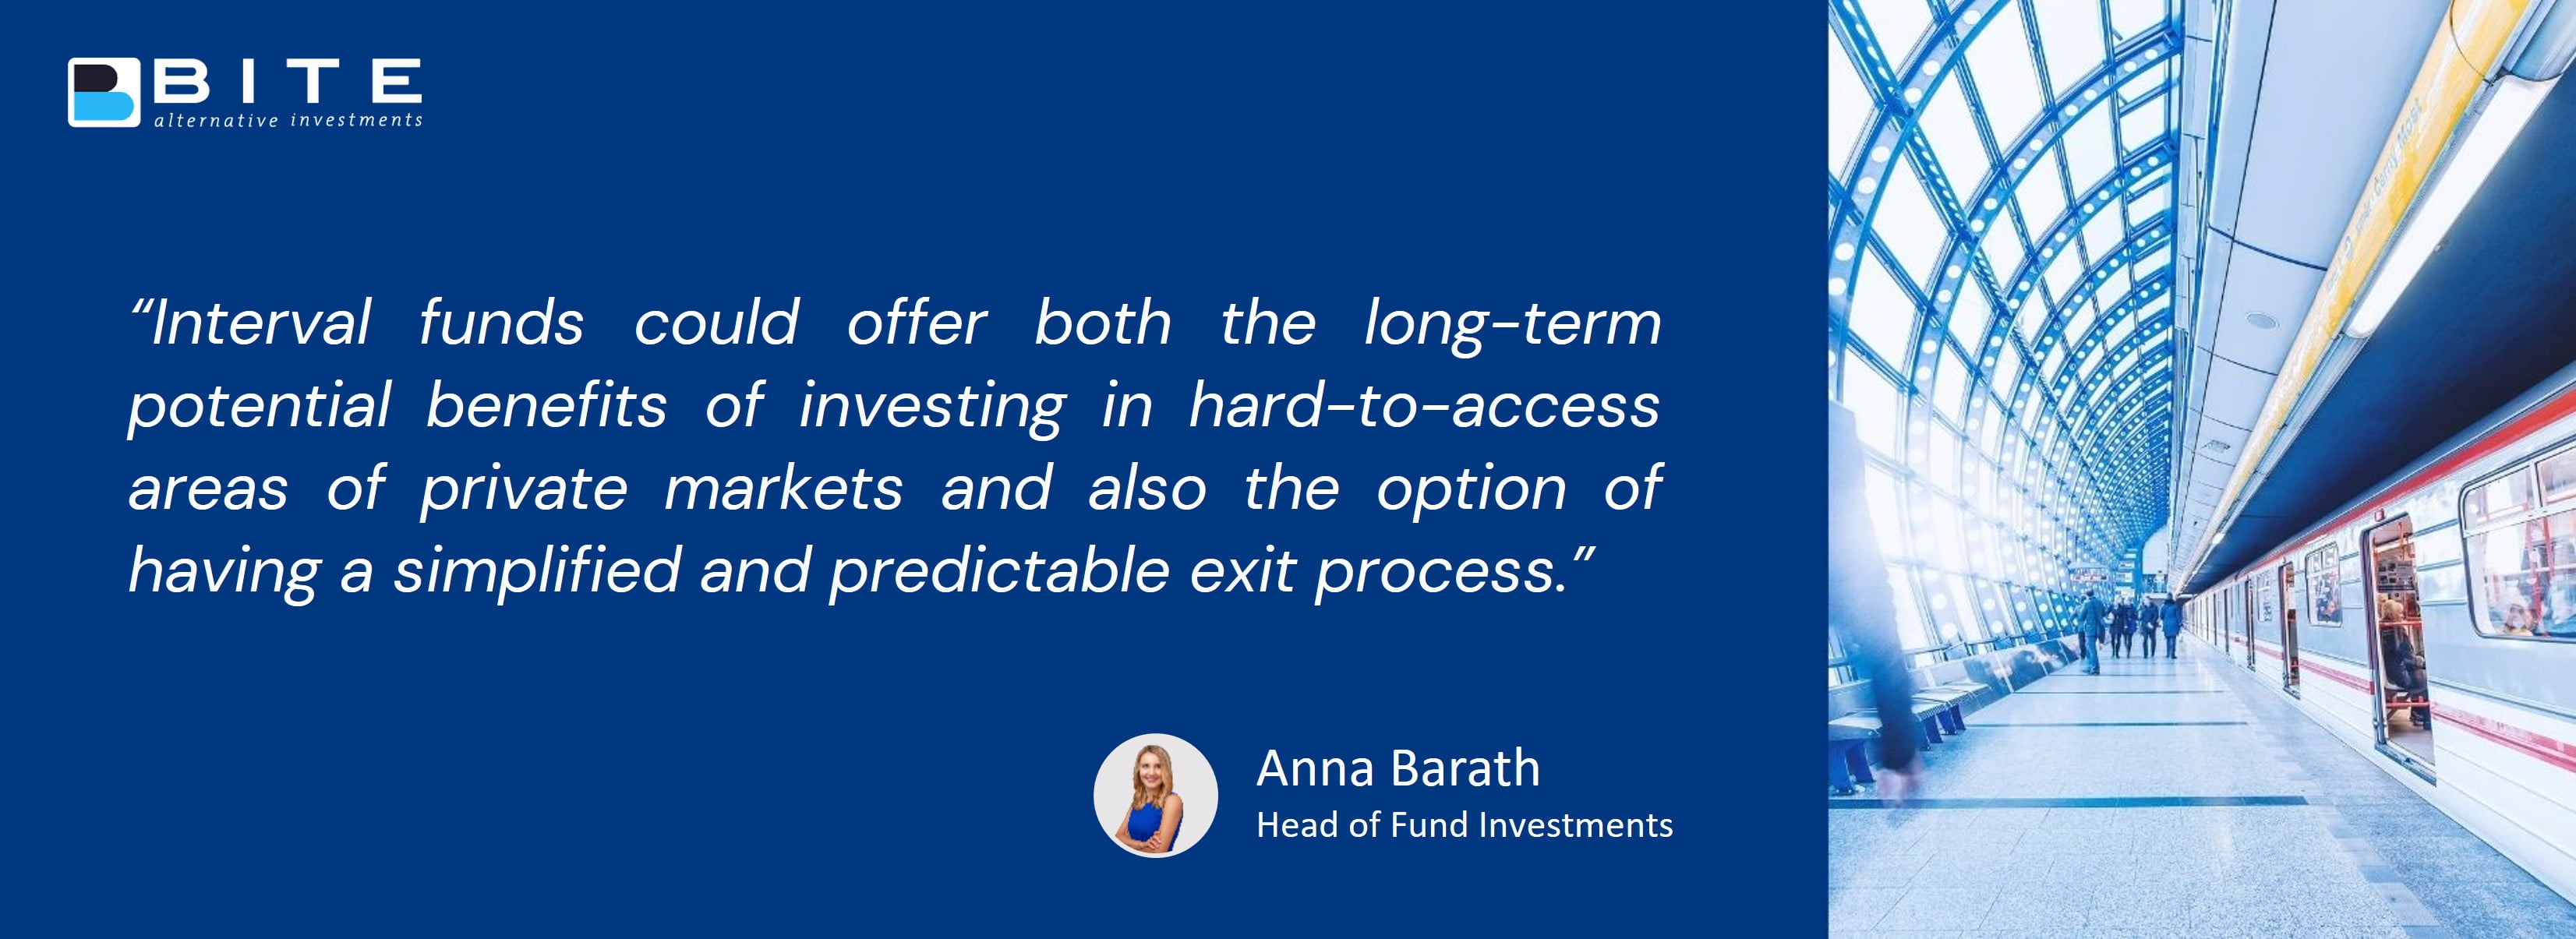 Advantages of interval funds